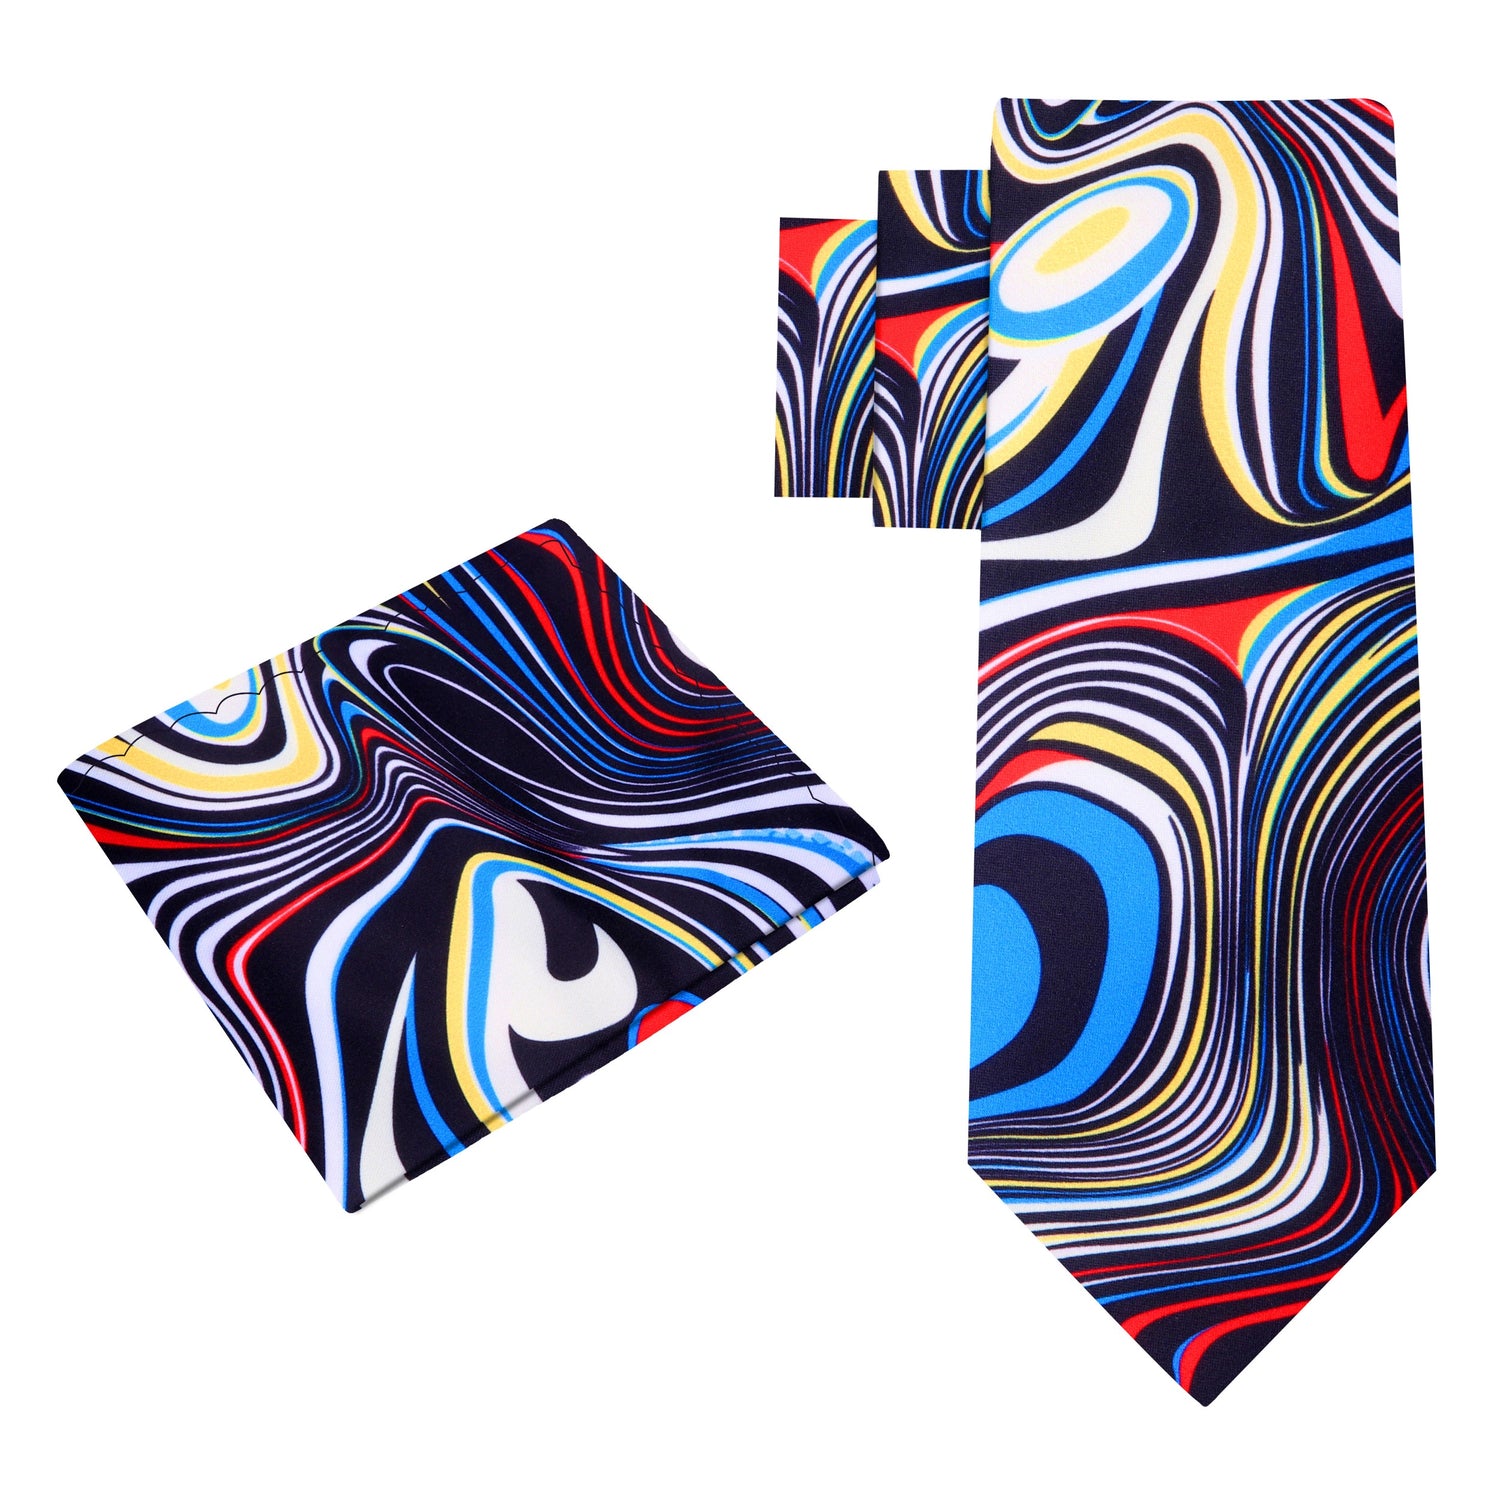 Alt View: Blue, Red, Yellow and White Abstract Tie and Matching Square